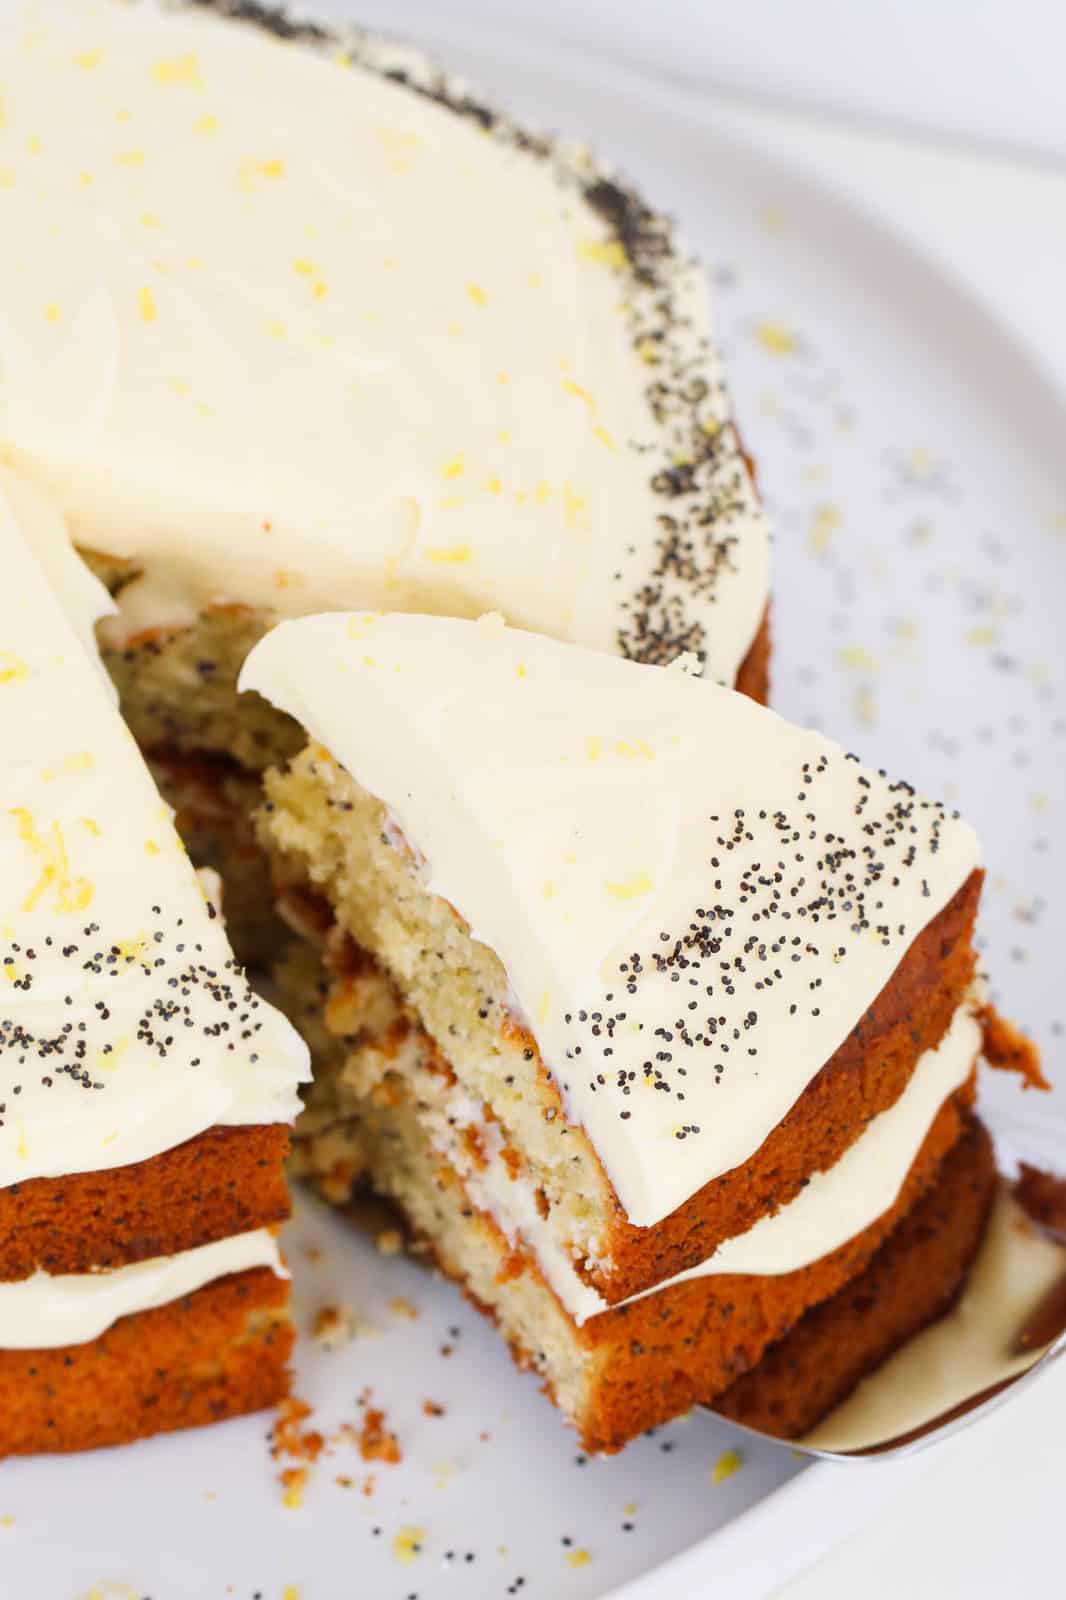 A slice of cream cheese frosted lemon and poppy seed cake being removed with a cake slice.